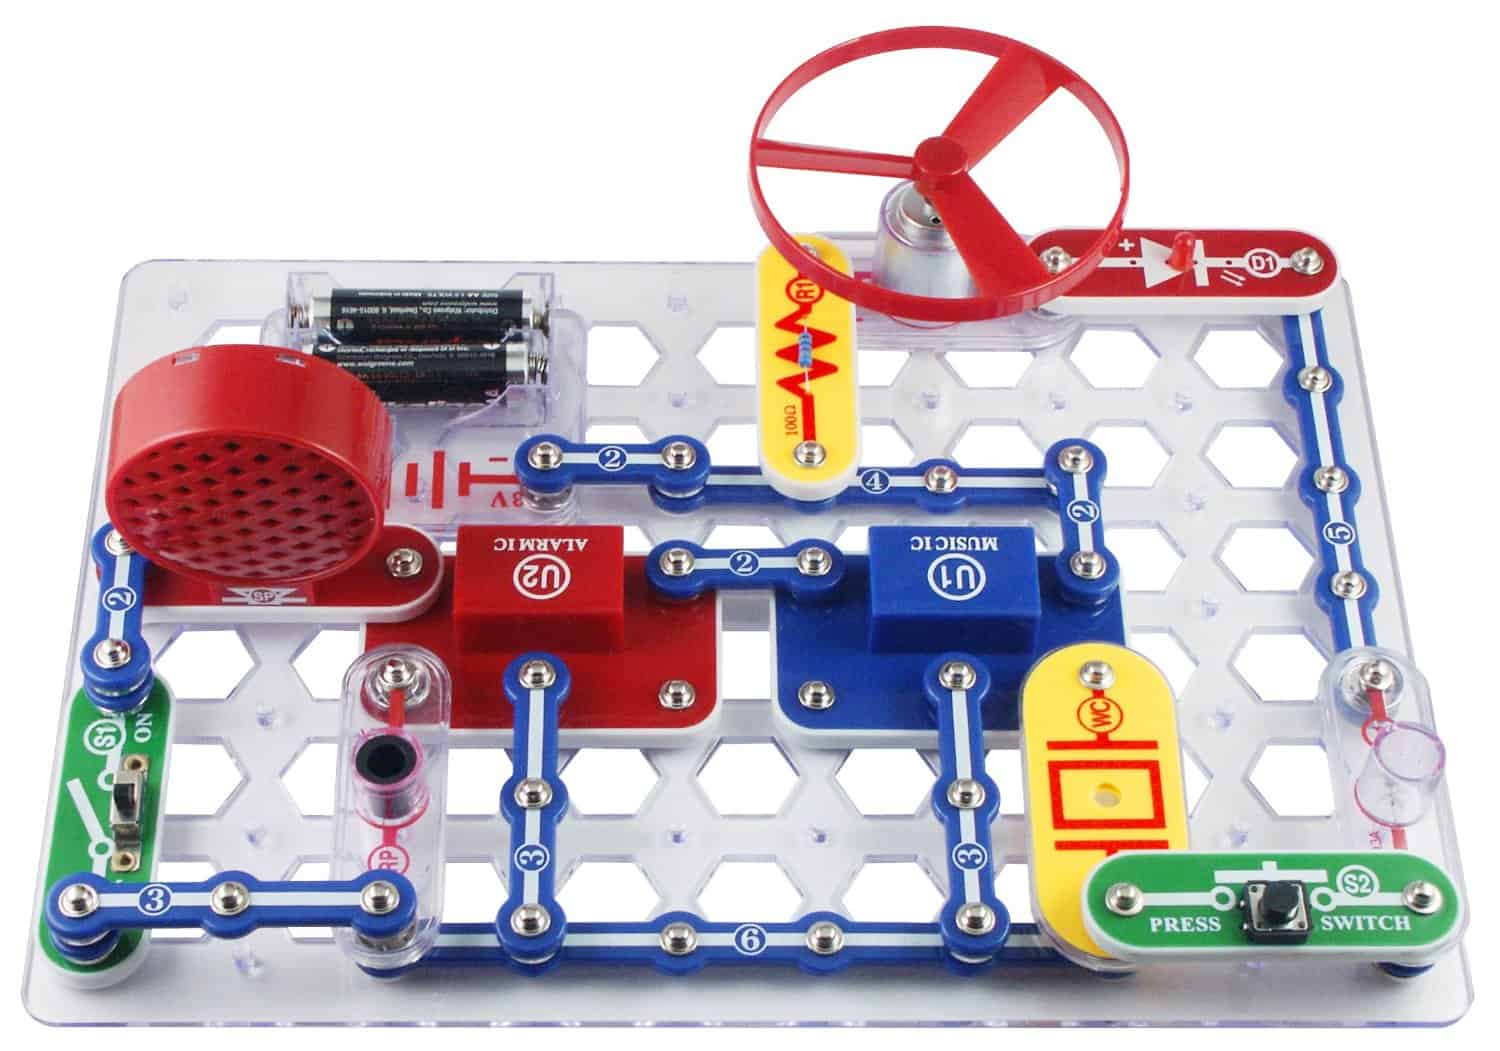 10+ Super Entertaining Stem Toys for Kids: Snap Circuits | www.thepinningmama.com